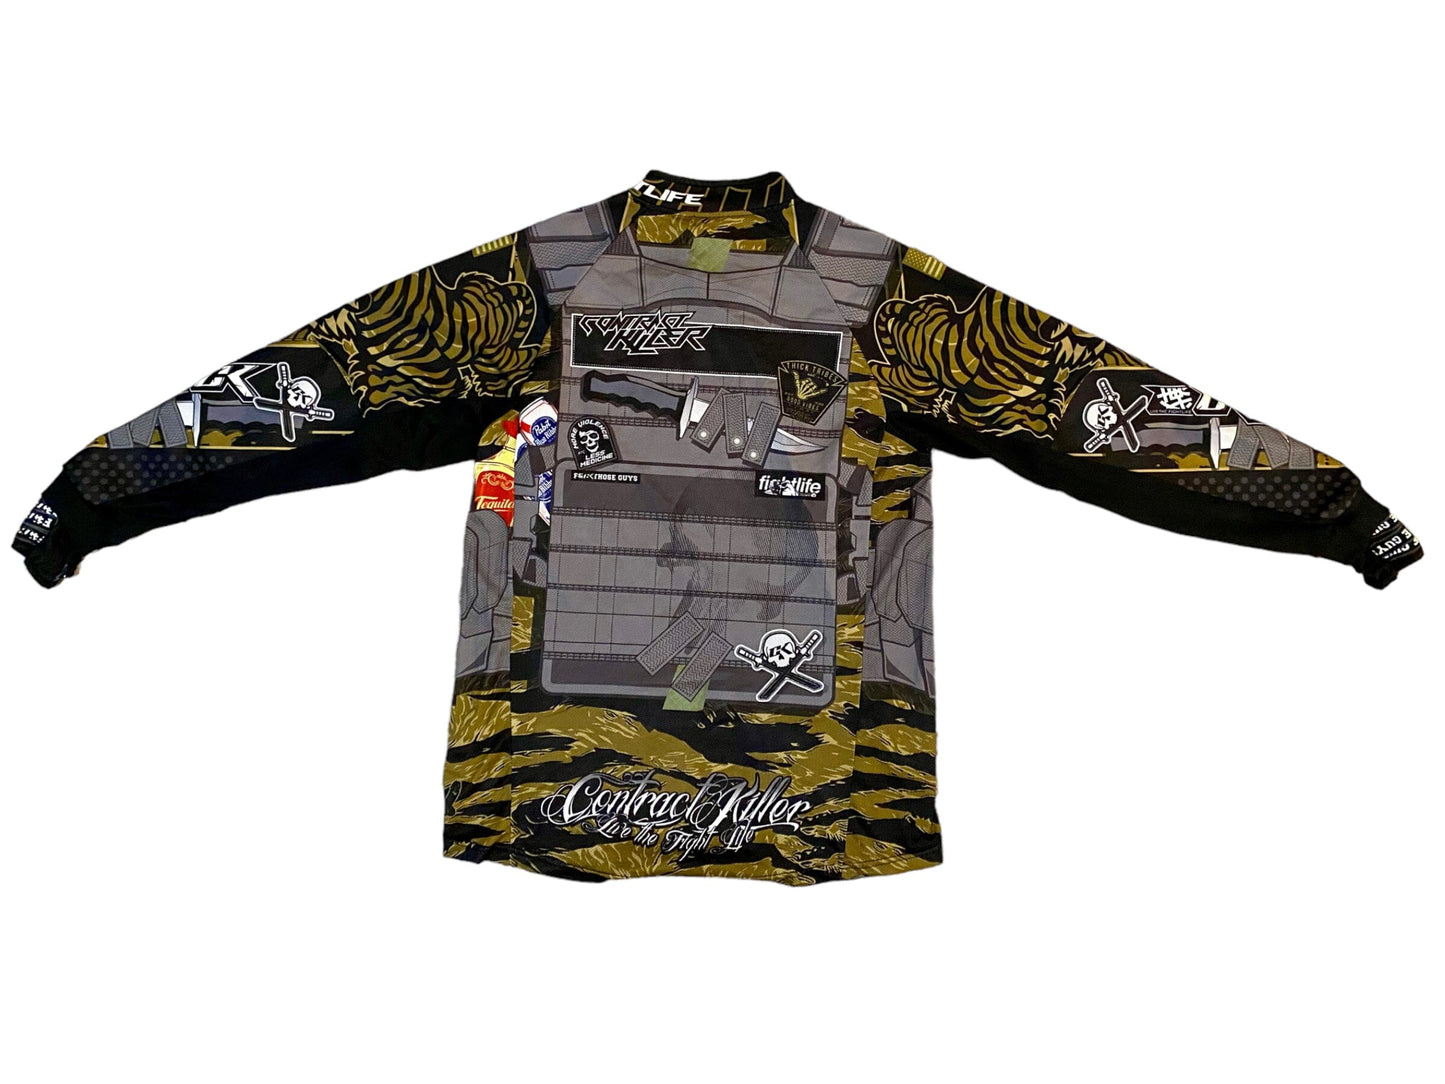 Used Contract Killer Paintball Jersey - size XL Paintball Gun from CPXBrosPaintball Buy/Sell/Trade Paintball Markers, Paintball Hoppers, Paintball Masks, and Hormesis Headbands